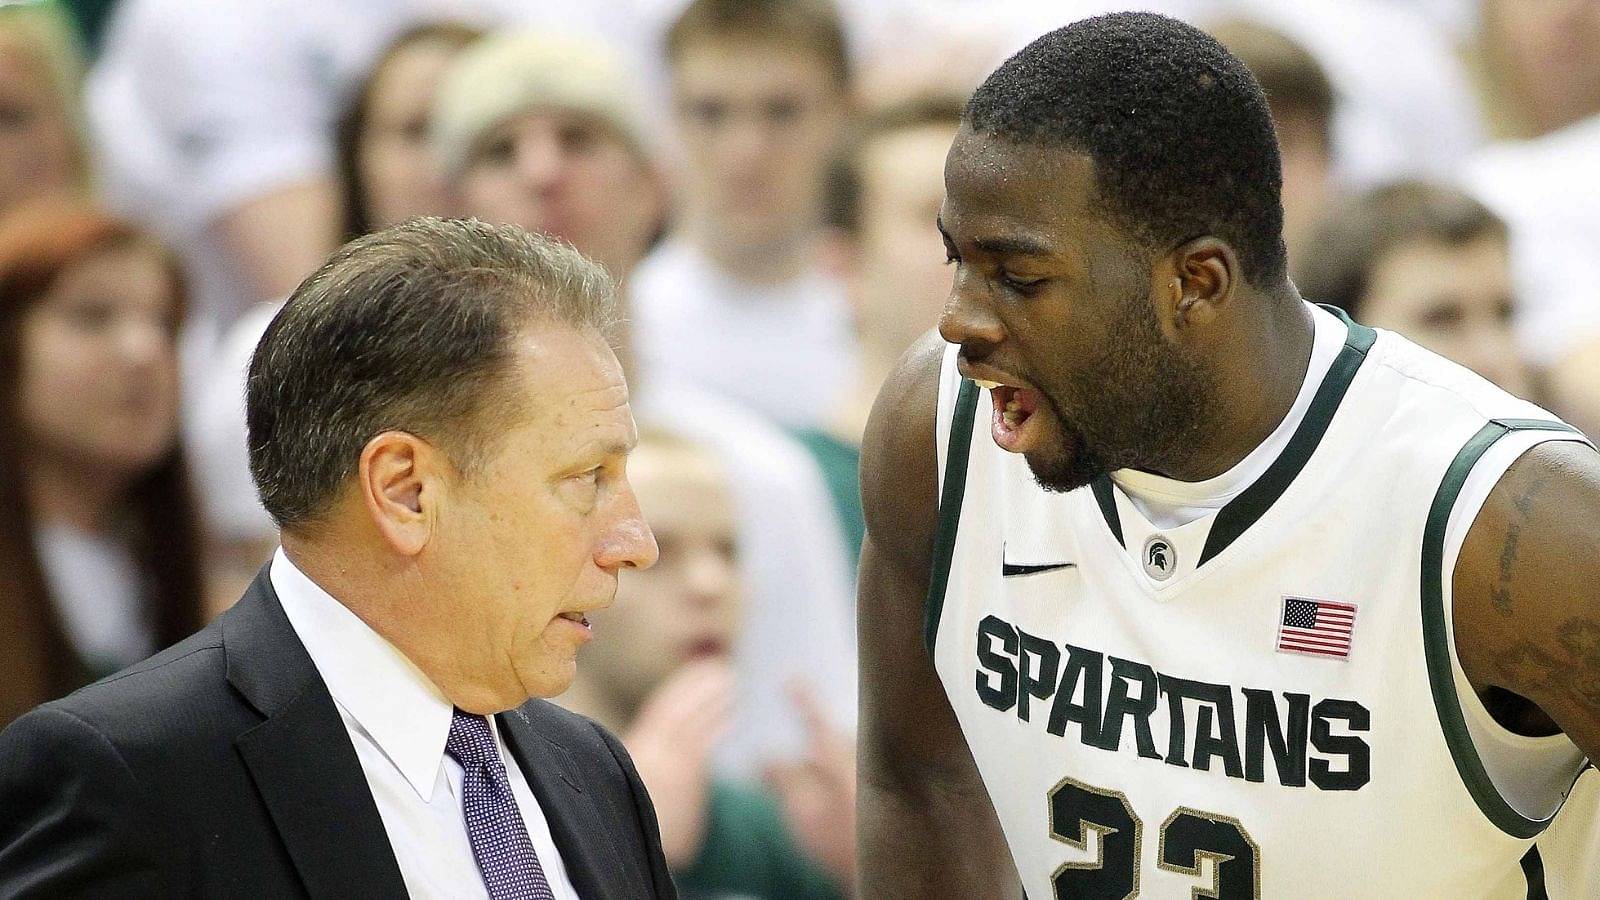 "Draymond Green might not be the greatest, but he might be one of the best winners": Tom Izzo has some kind words for his former Spartans player amid controversies